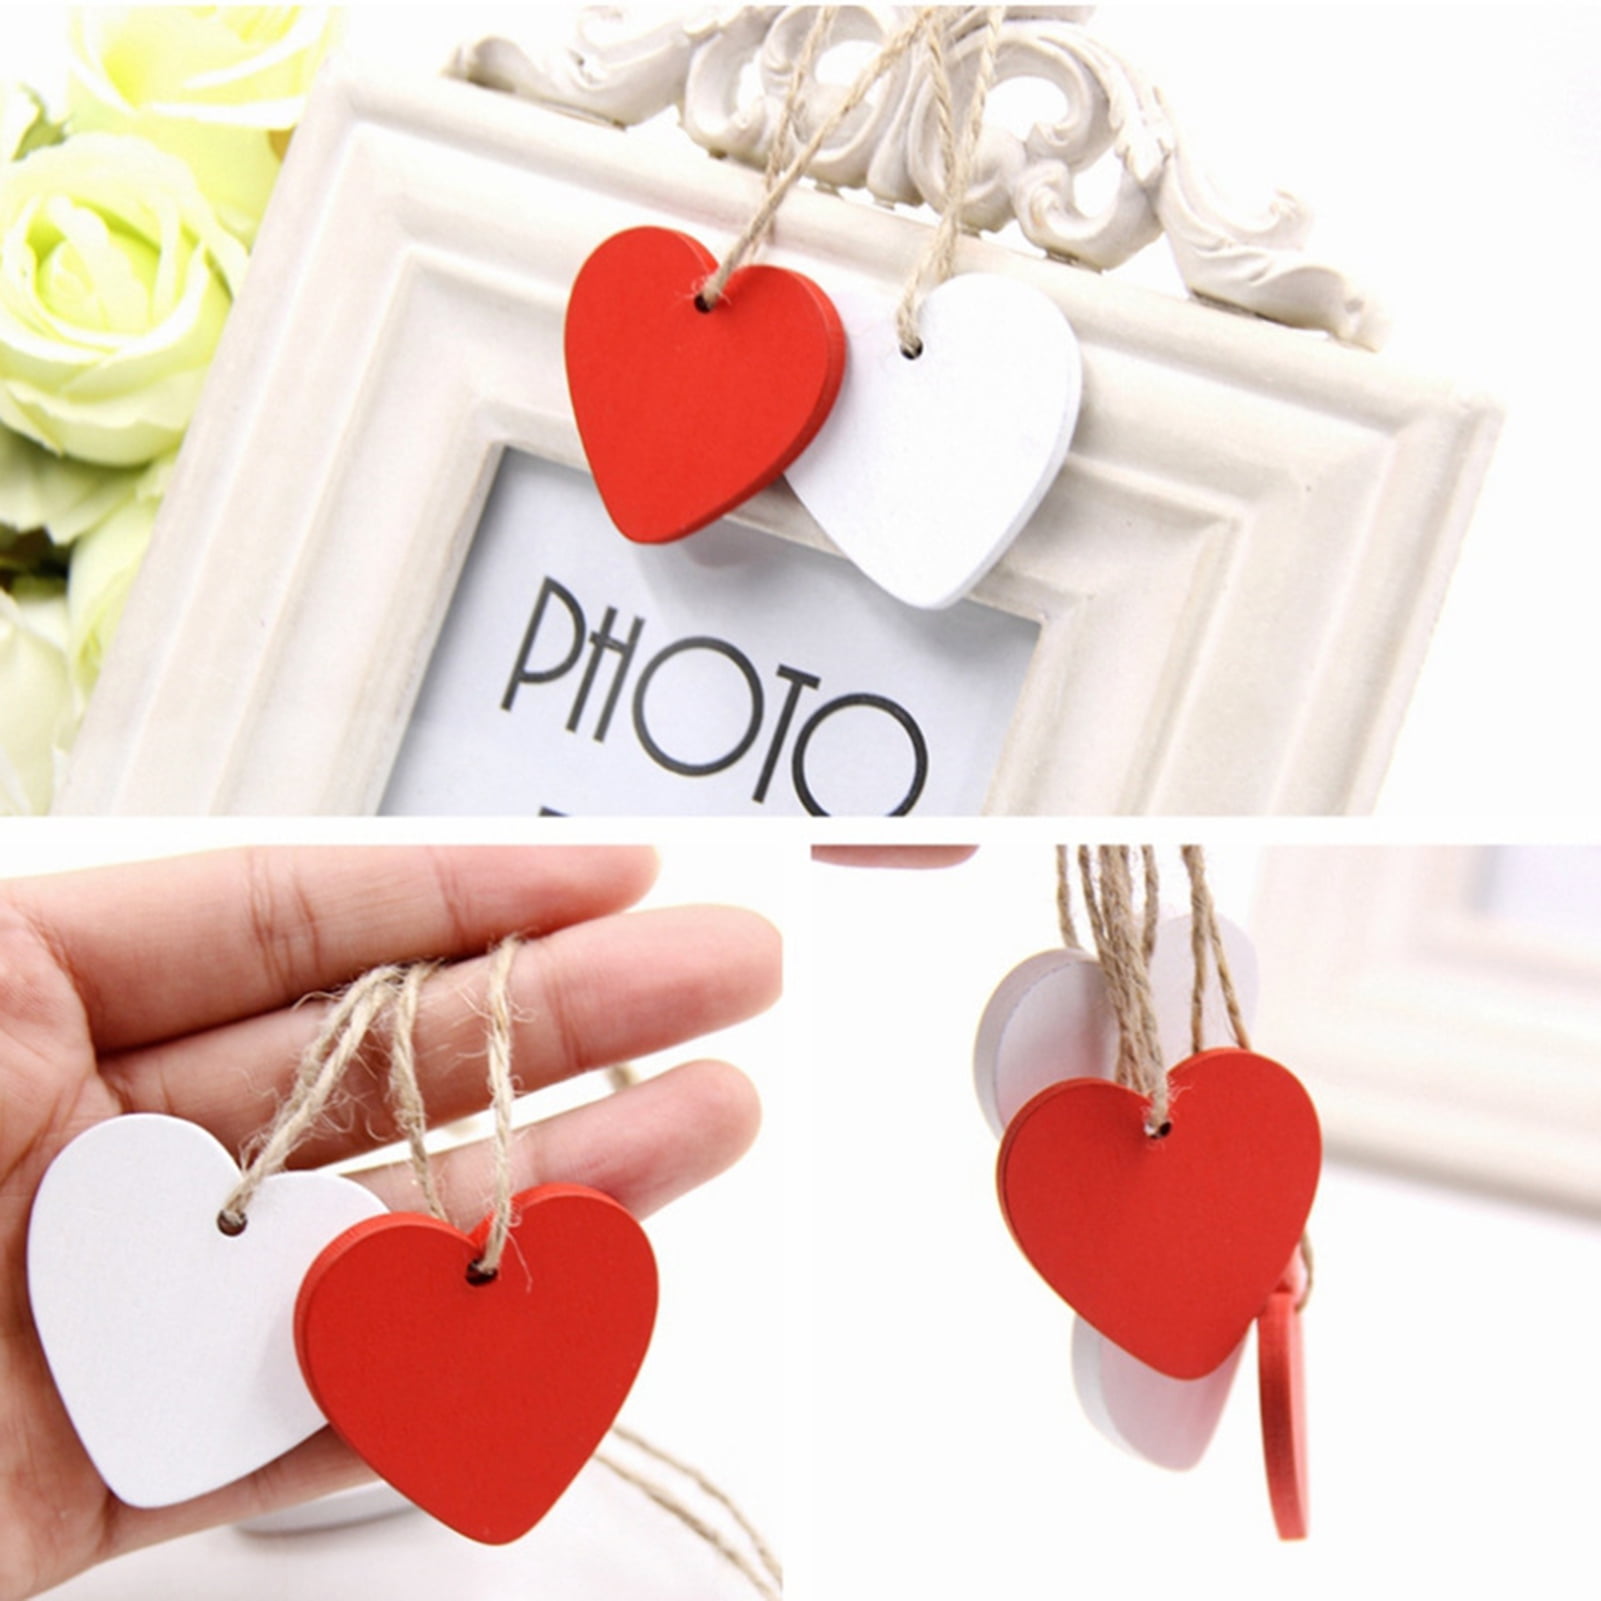 Heart Slate Hanging Tags Memo Office Wedding Supplies Chalkboard Tag Signs x3 